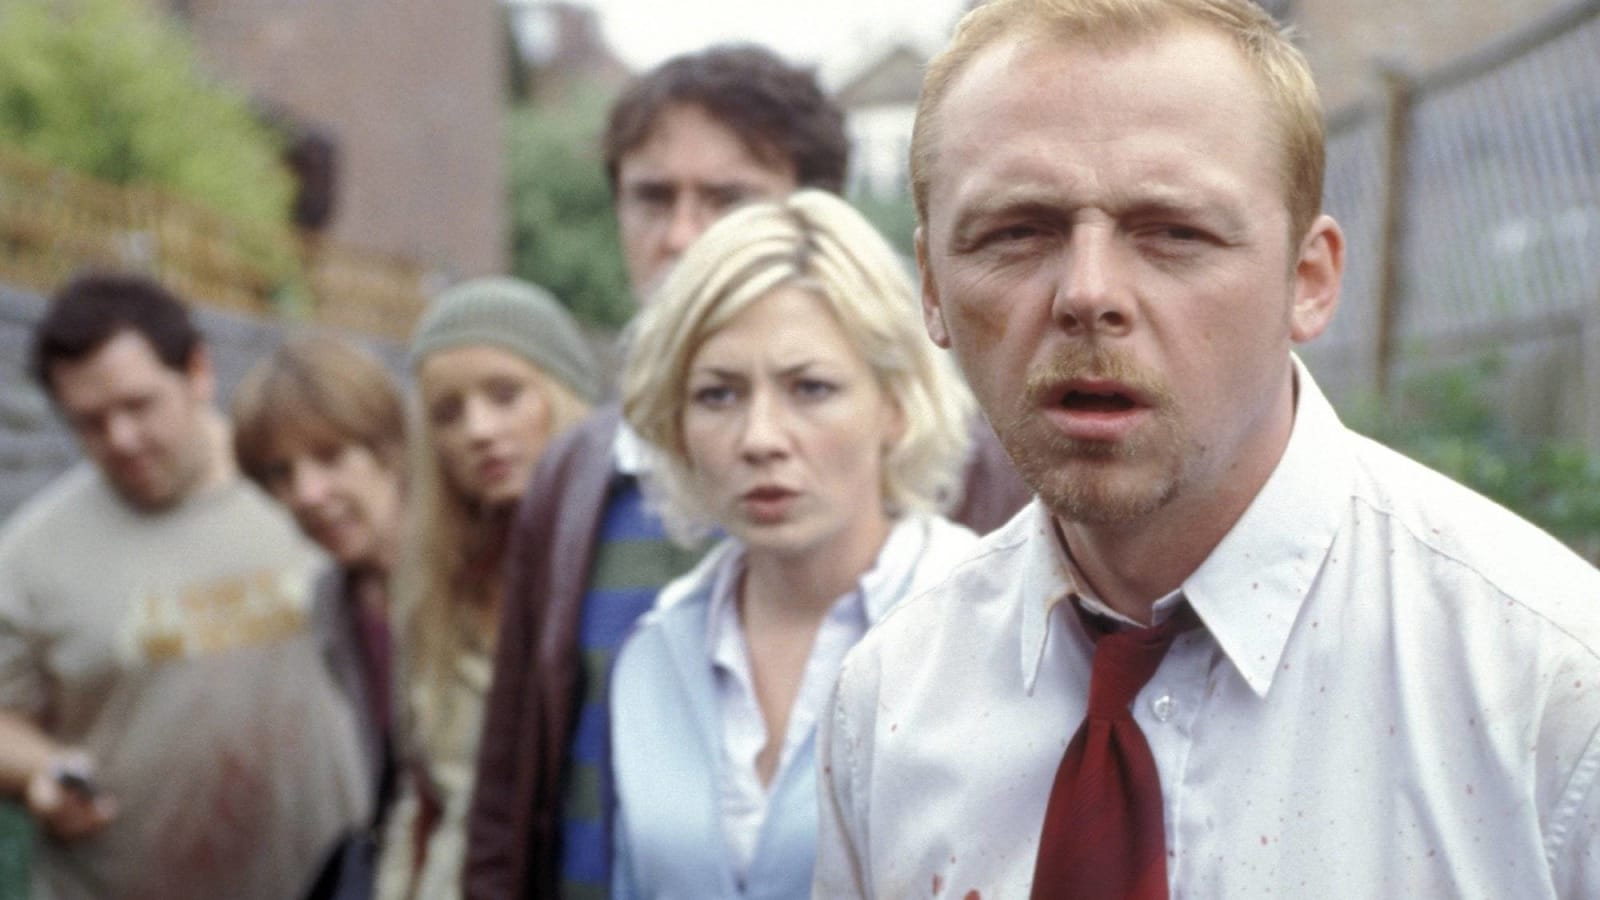 20 facts you might not know about 'Shaun of the Dead'